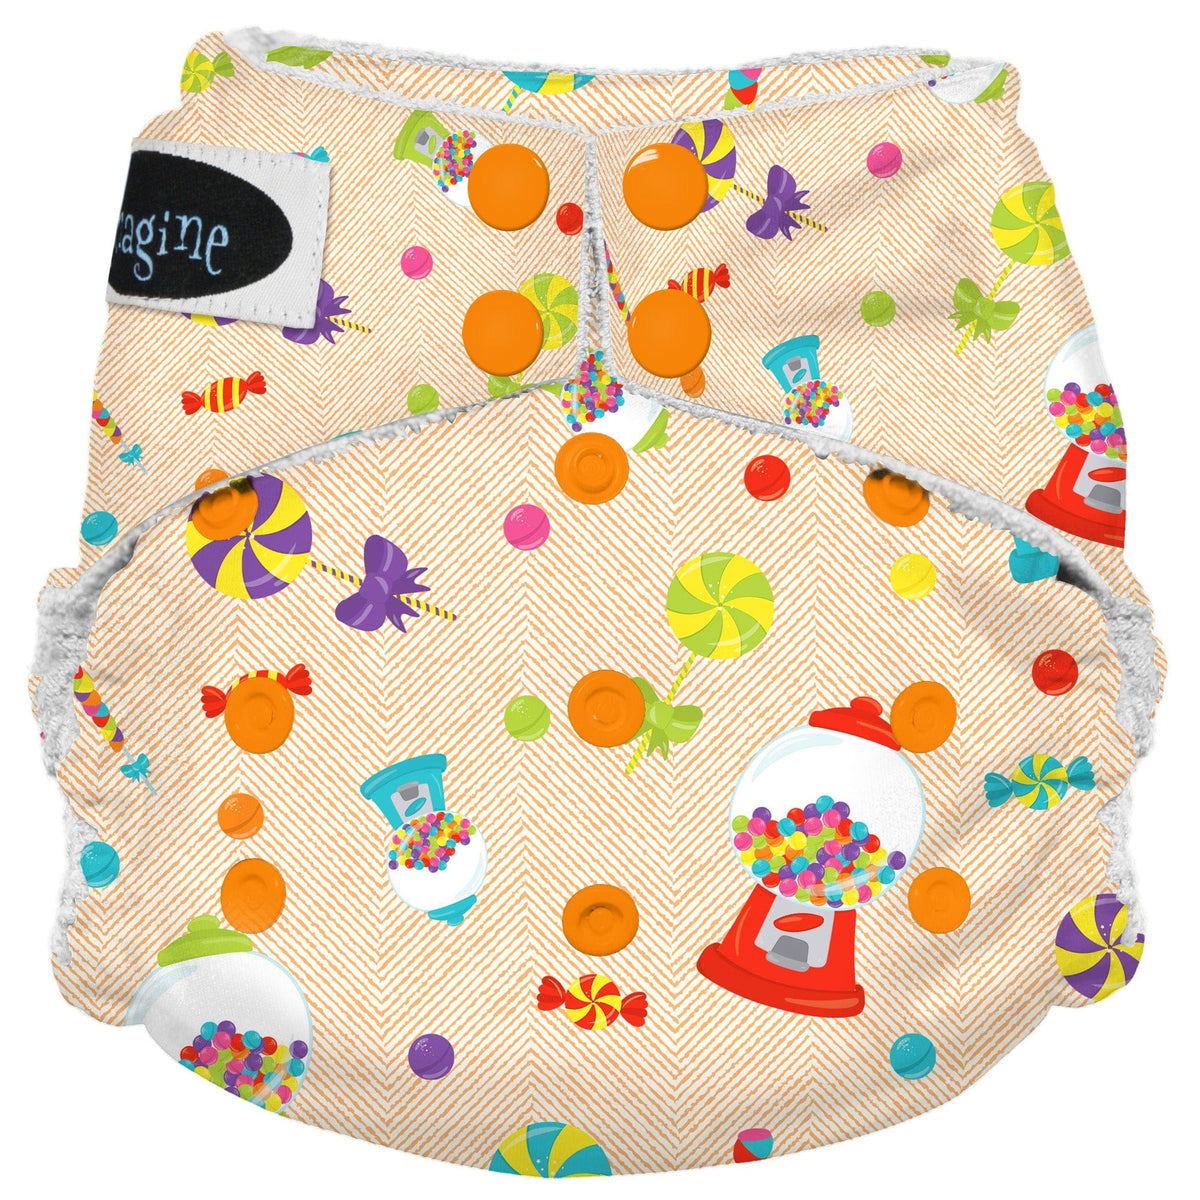 Flip Diapers Stay Dry One-Size Insert 3-Pack